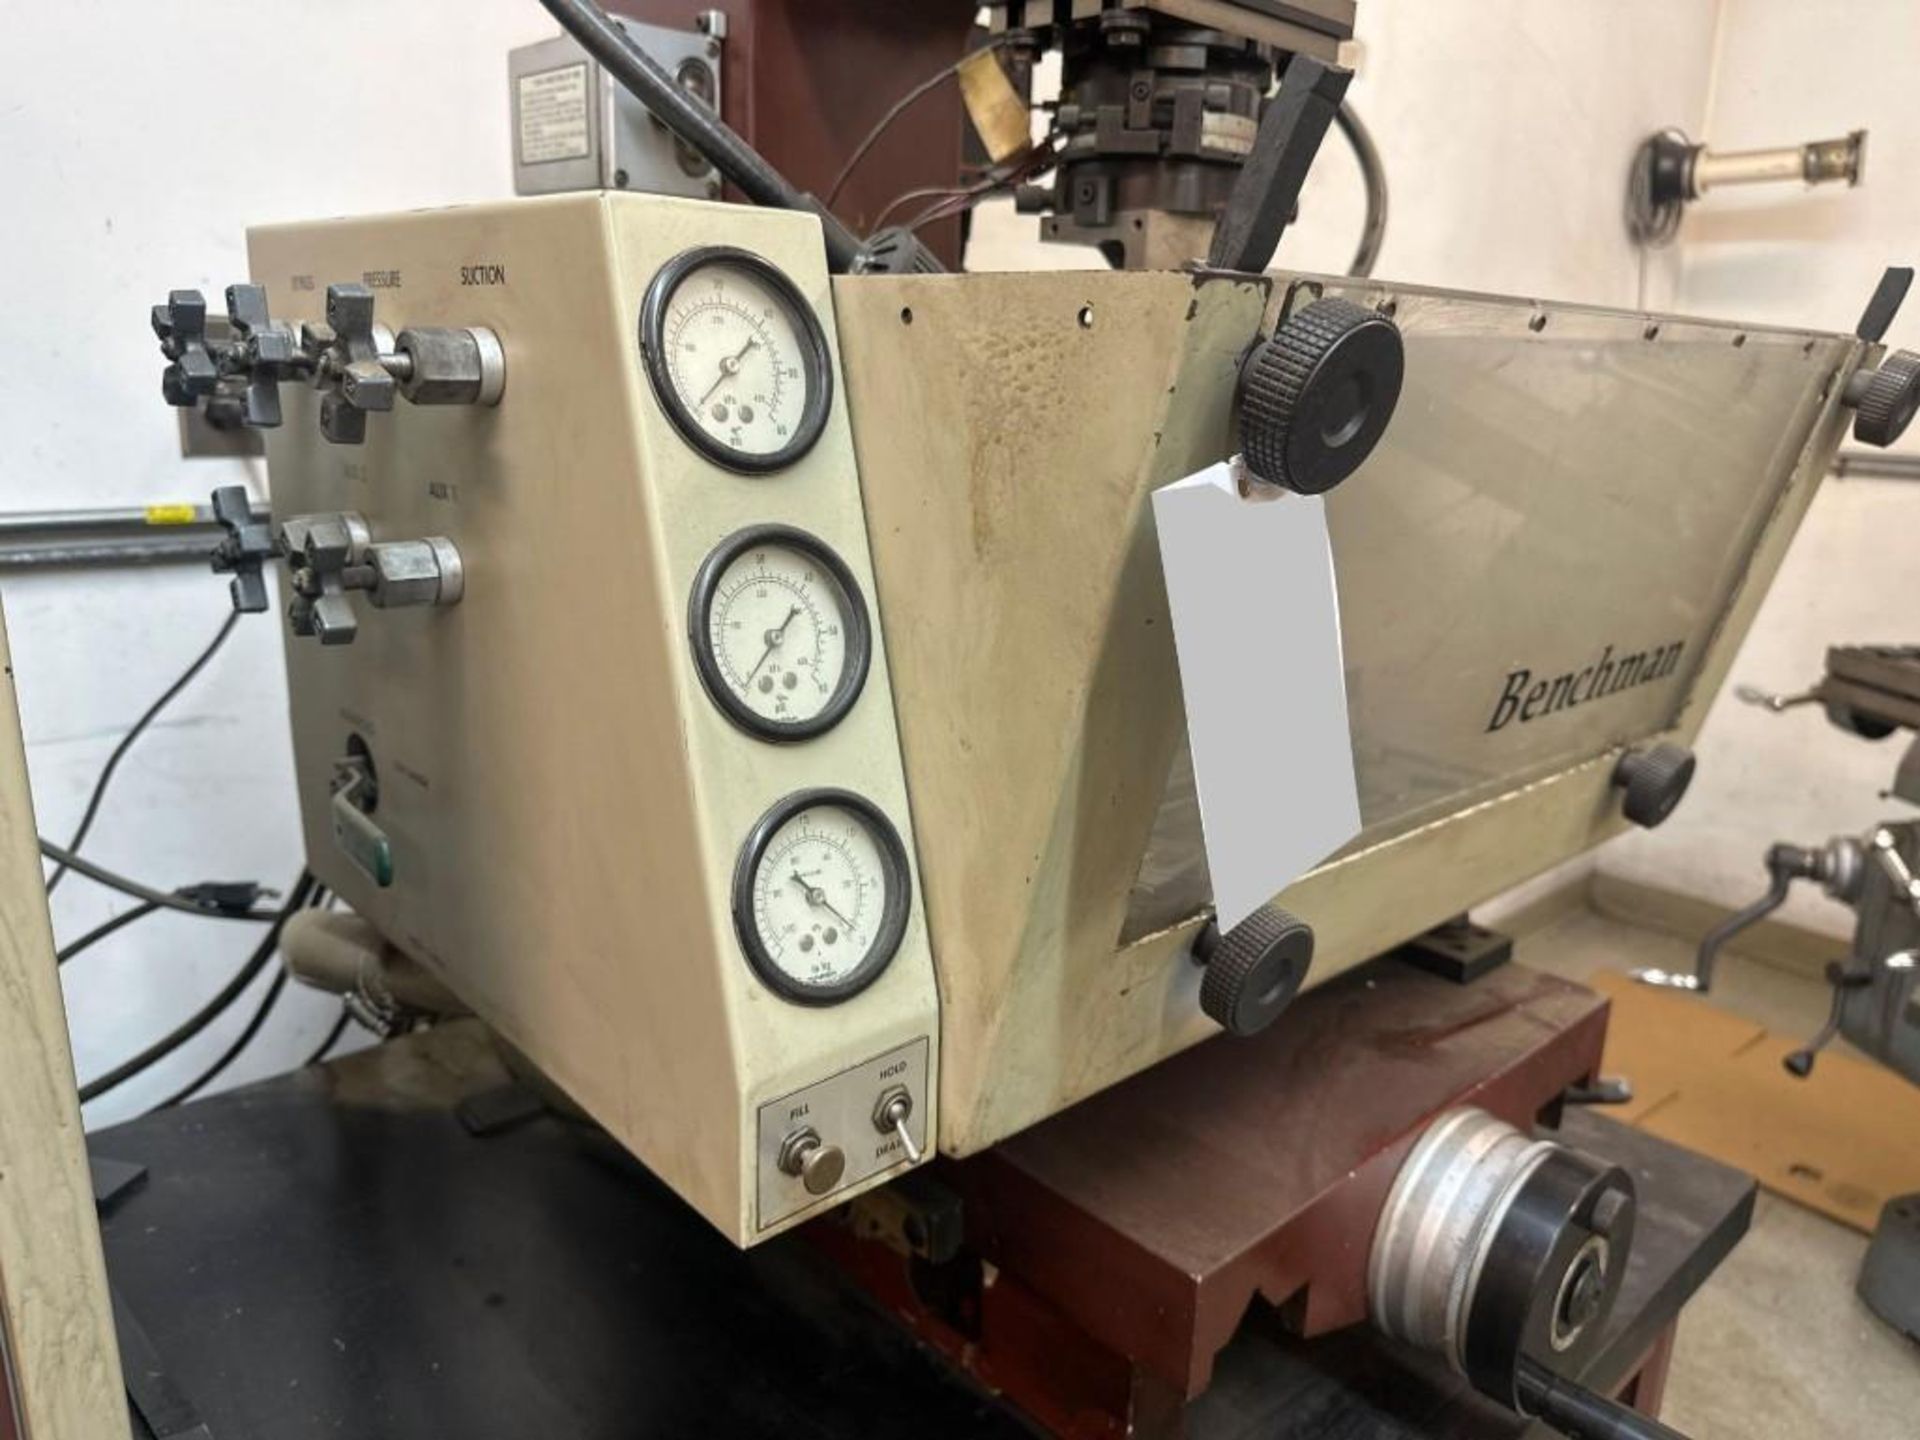 Hansvedt Benchman Sinker EDM, 20 Amps, Table Size: 9" x 14.1", X-Axis 8.4", Y-Axis 5.5" - Image 4 of 9